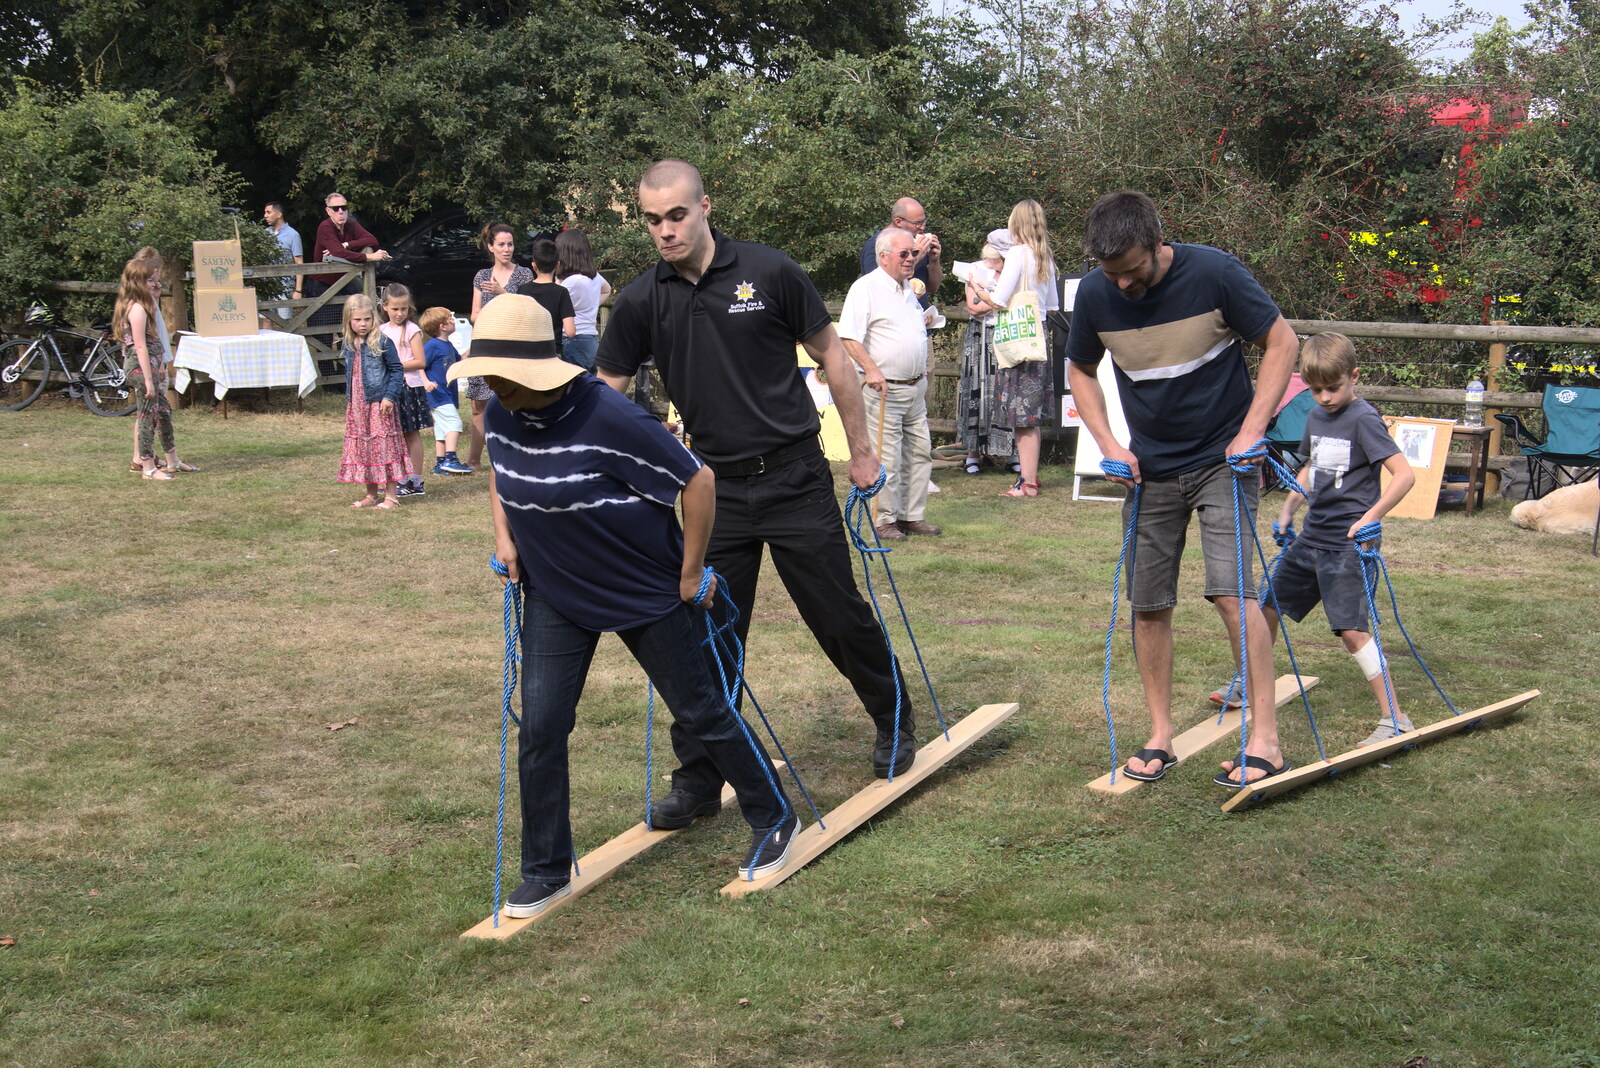 The other fireman enters the grass-skiing event from The Brome and Oakley Fête, Oakley Hall, Suffolk - 19th September 2021